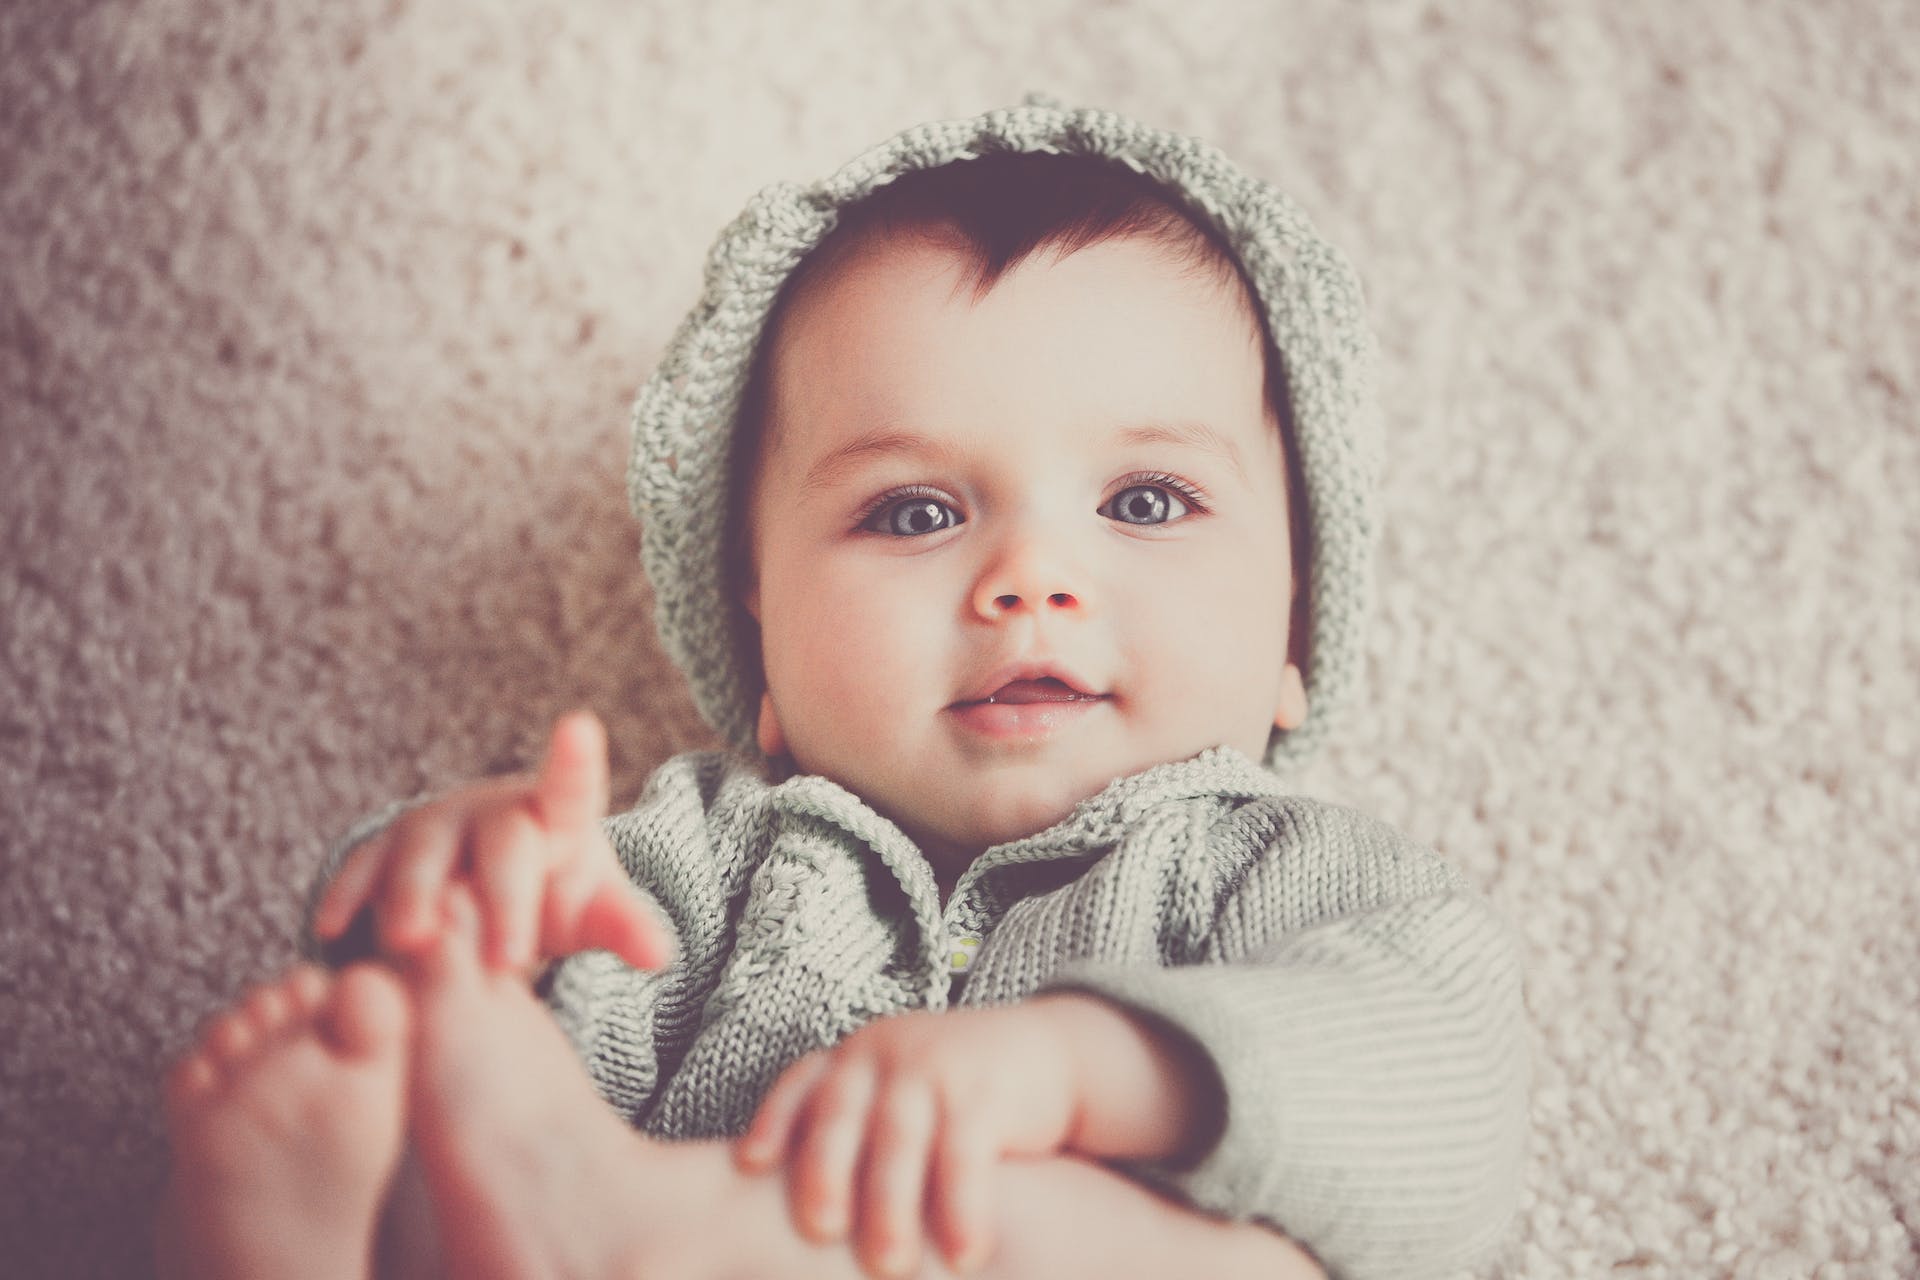 A baby | Source: Pexels